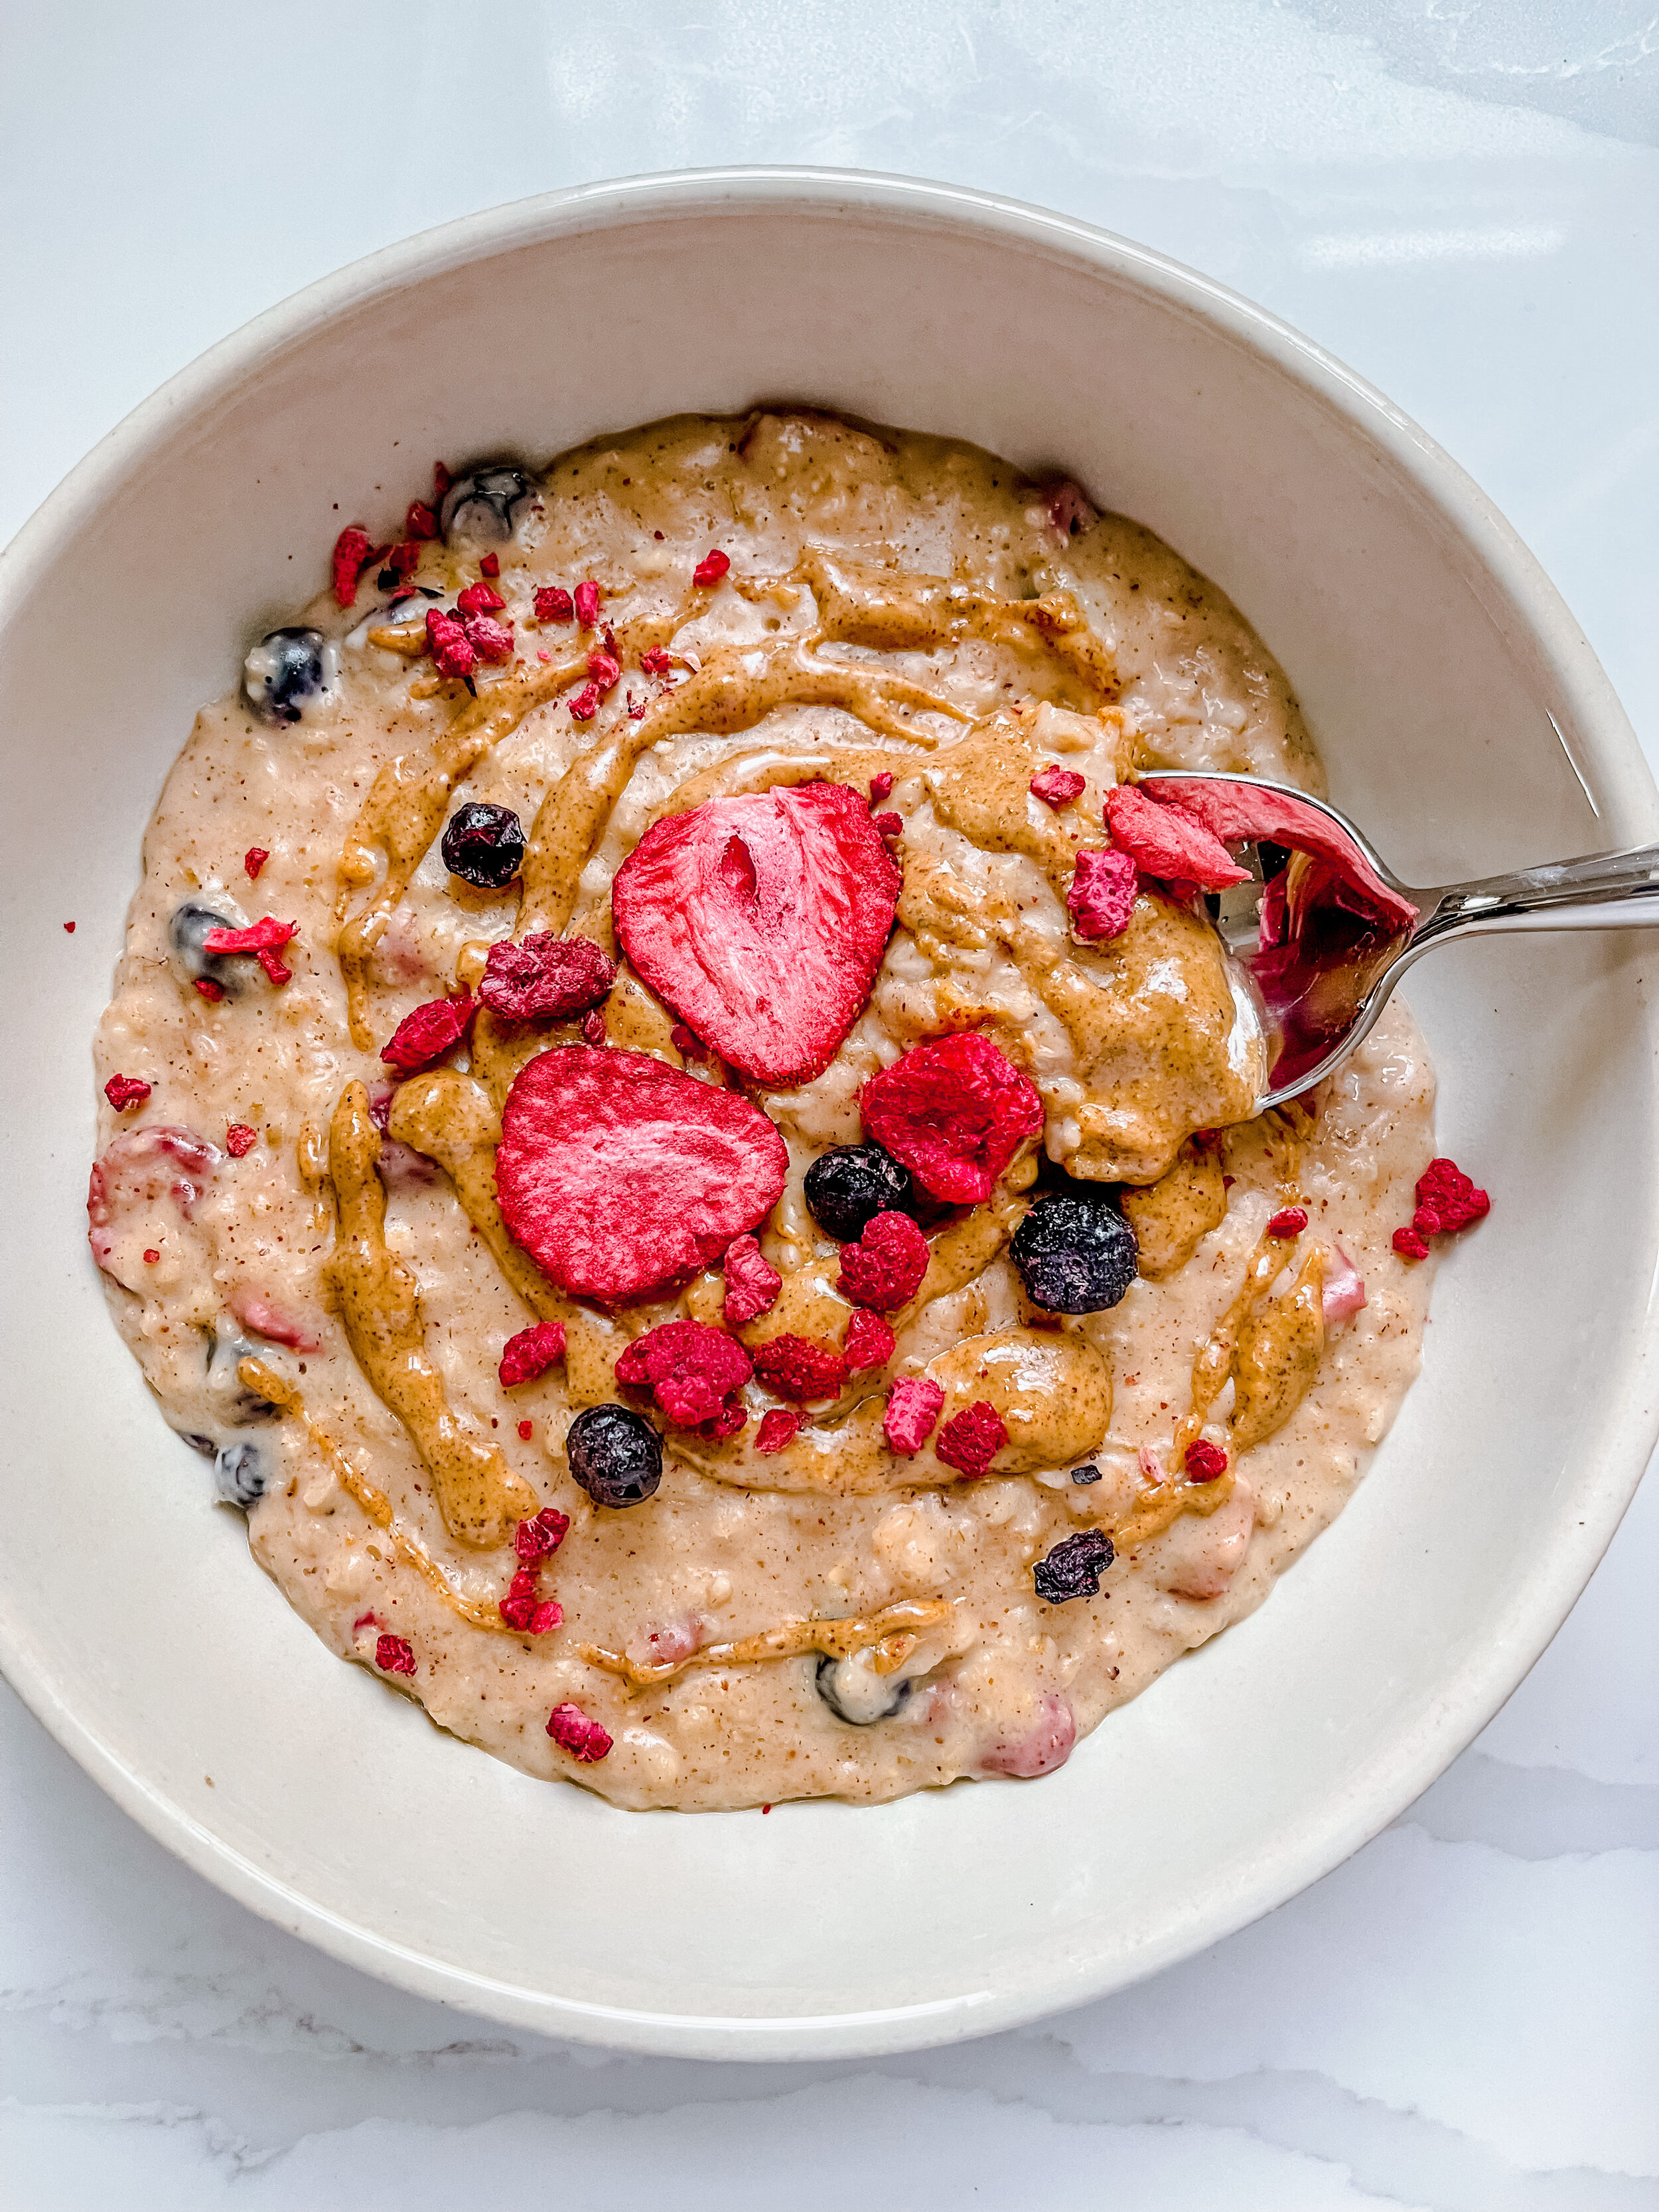 Oatmeal/Cereal With Berries